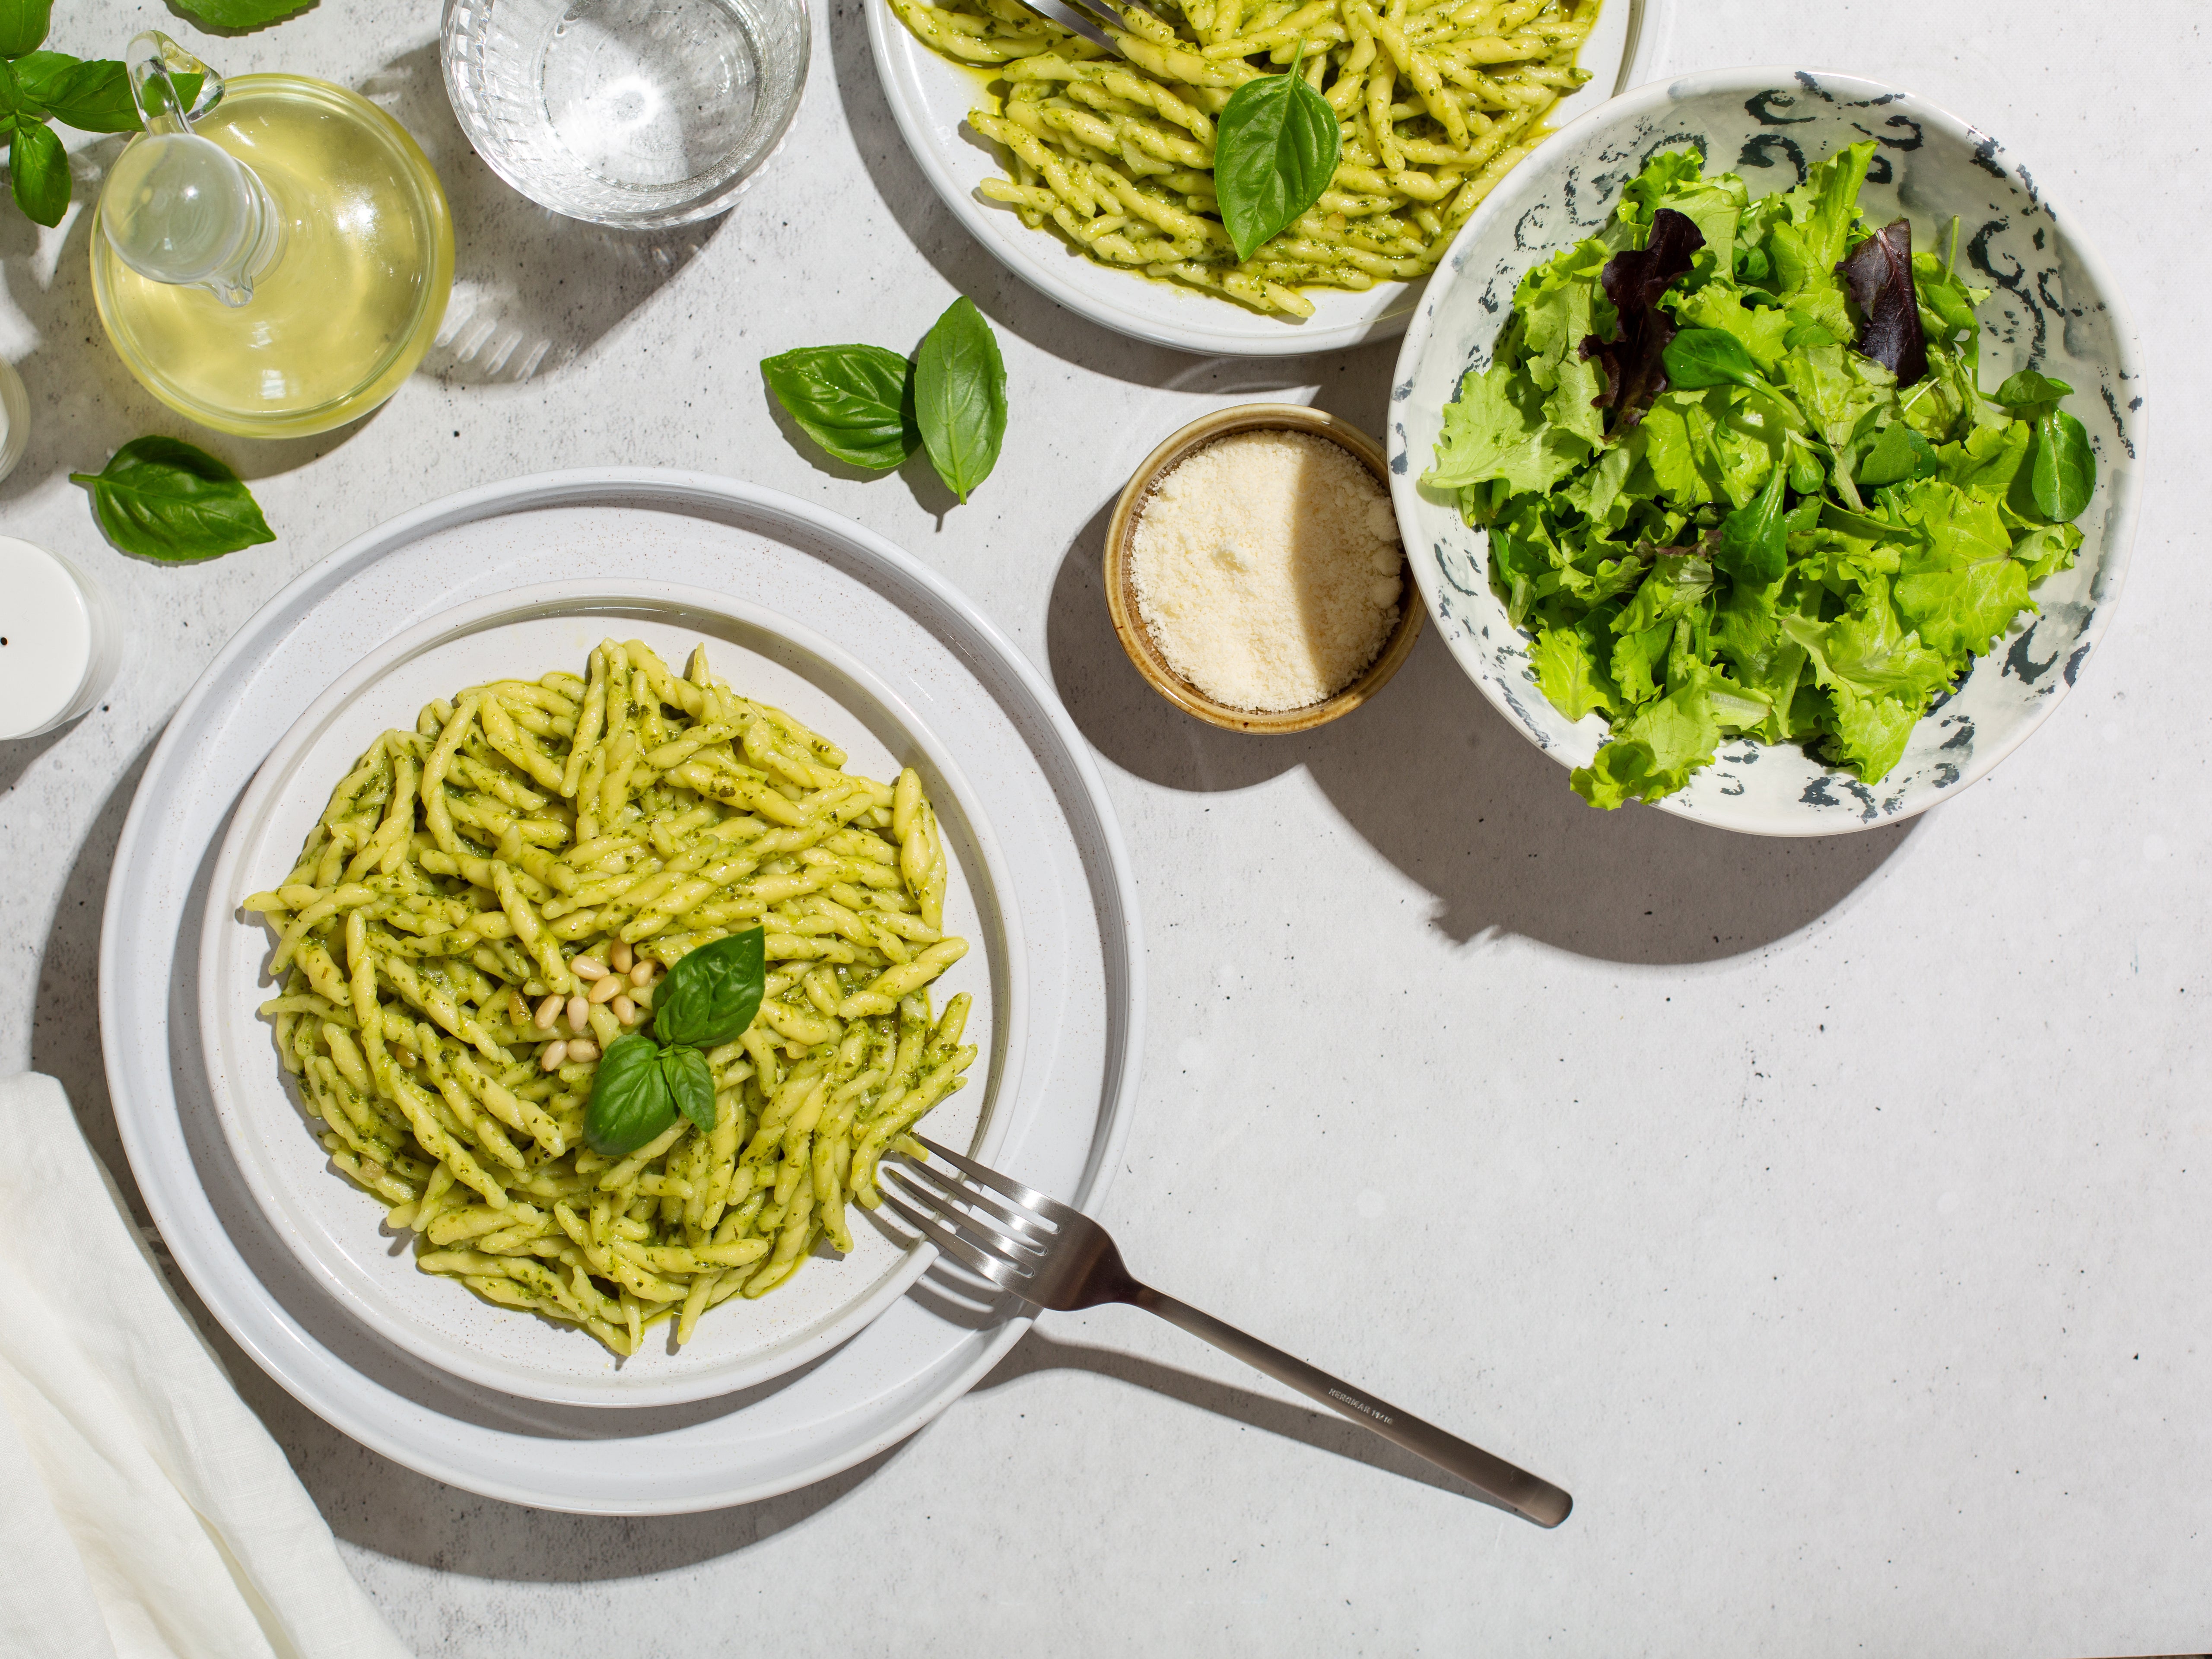 Pesto pasta is a staple, but that doesn’t mean you can’t experiment